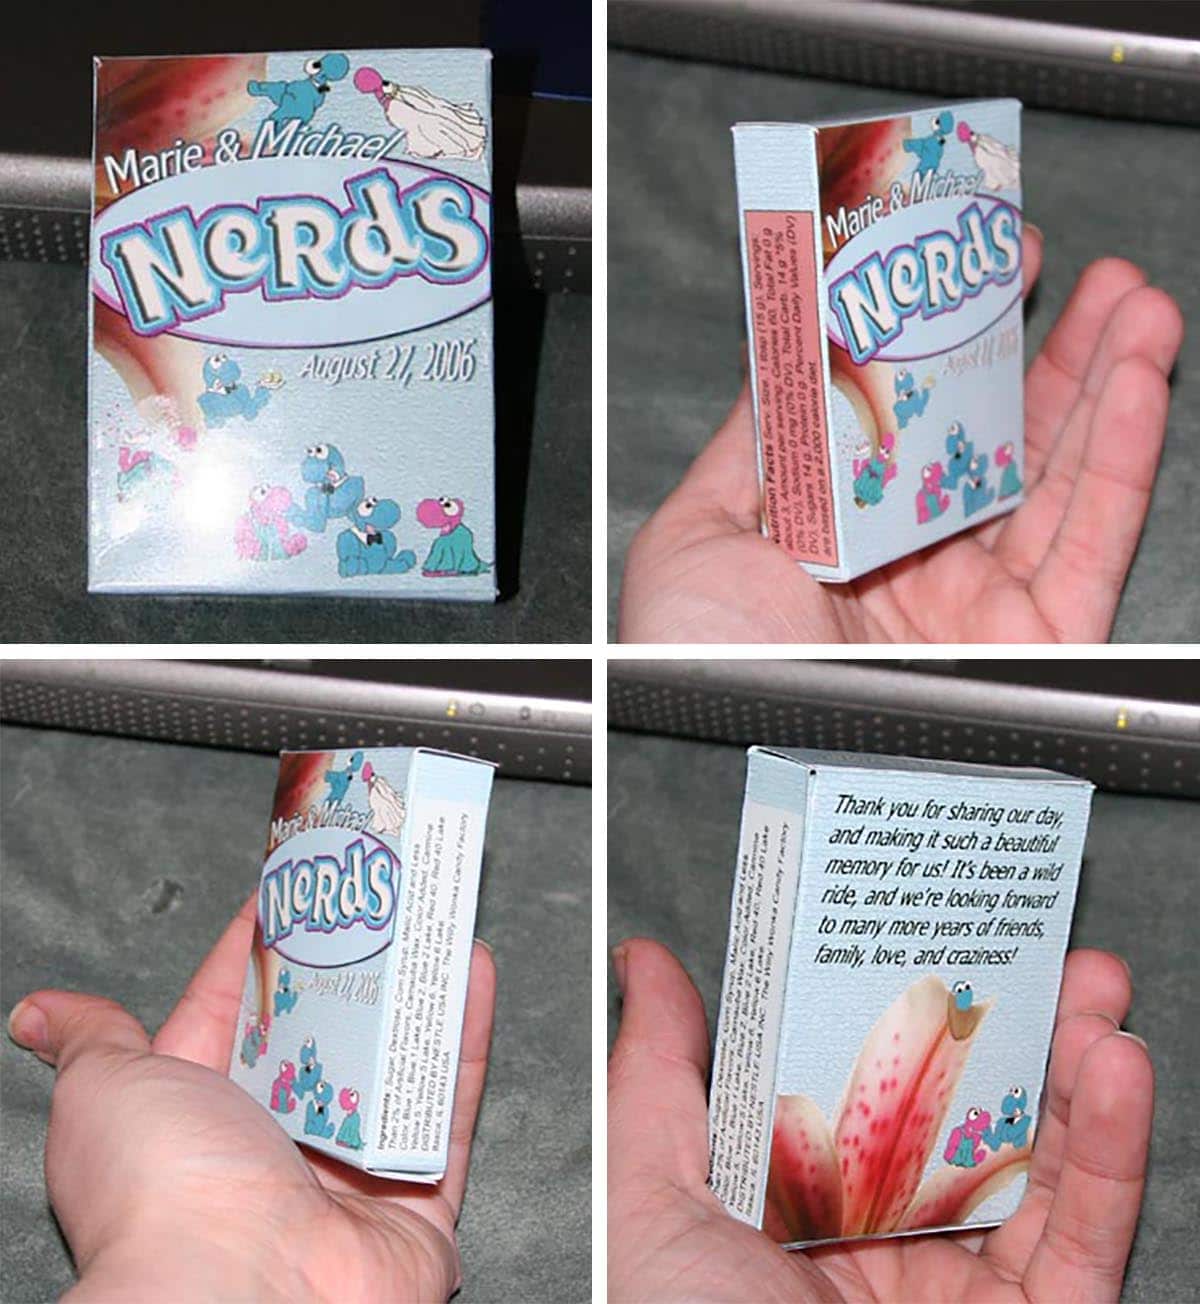 A 4 part image showing all sides of a custom Nerds candy box.